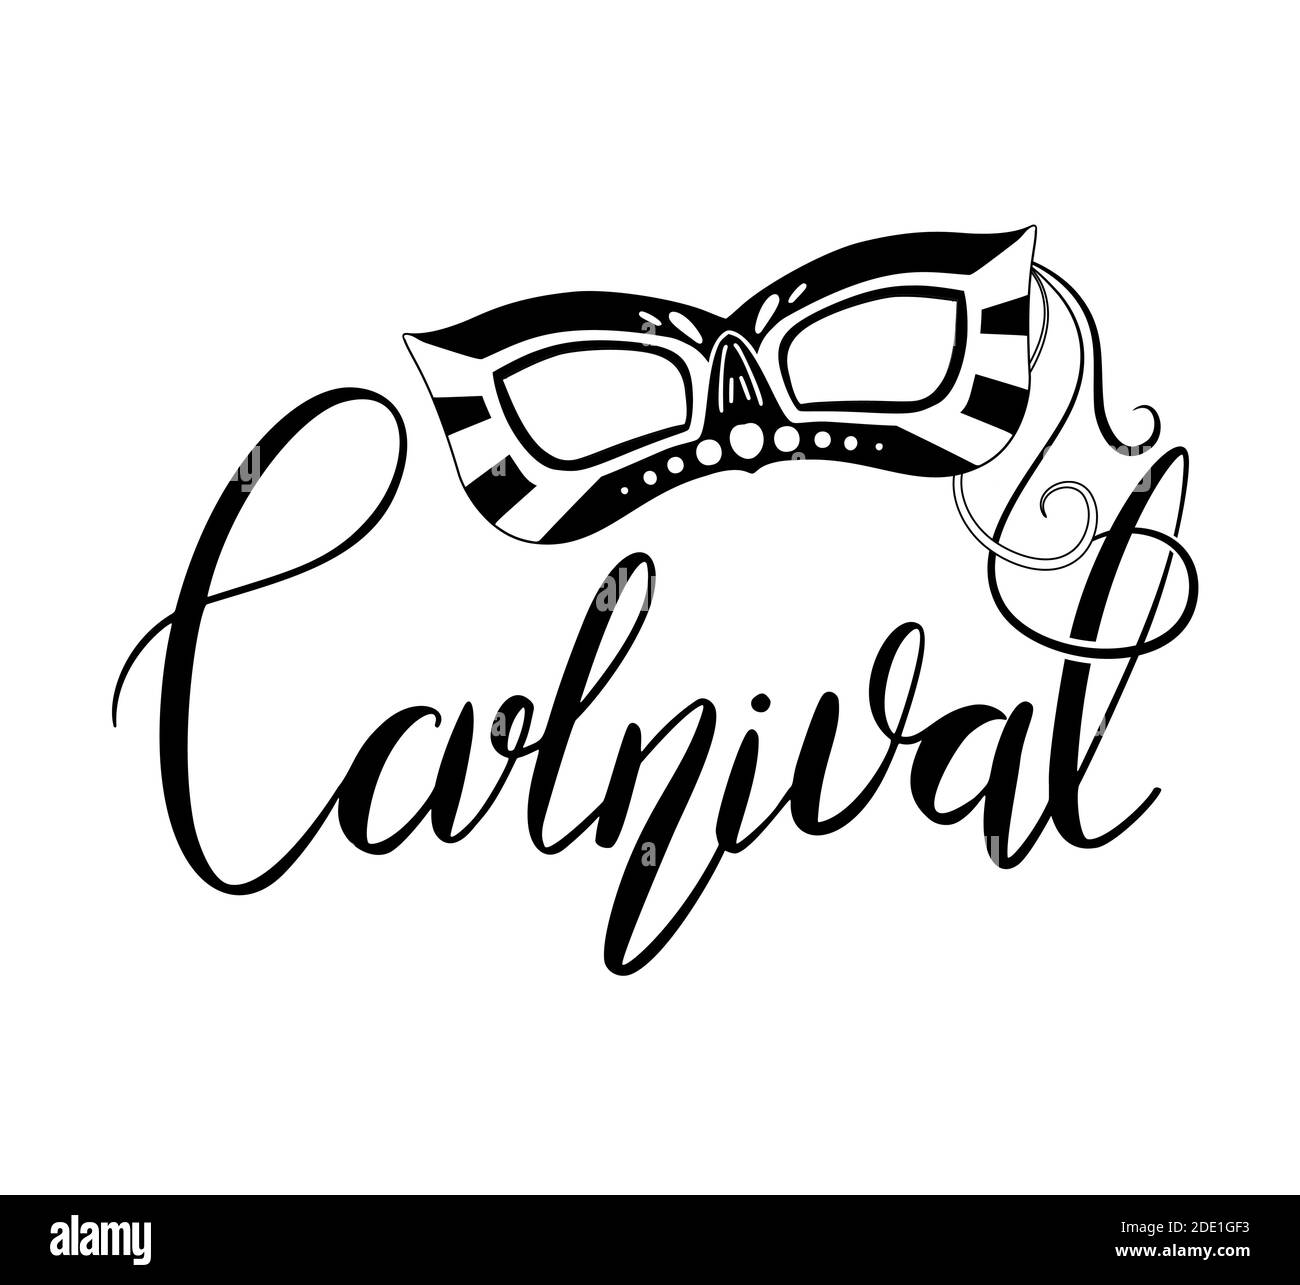 Carnival. Lettering brush with silhouette masquerade mask isolated on white background. Festive calligraphy quote. Vector element for greeting cards, Stock Vector